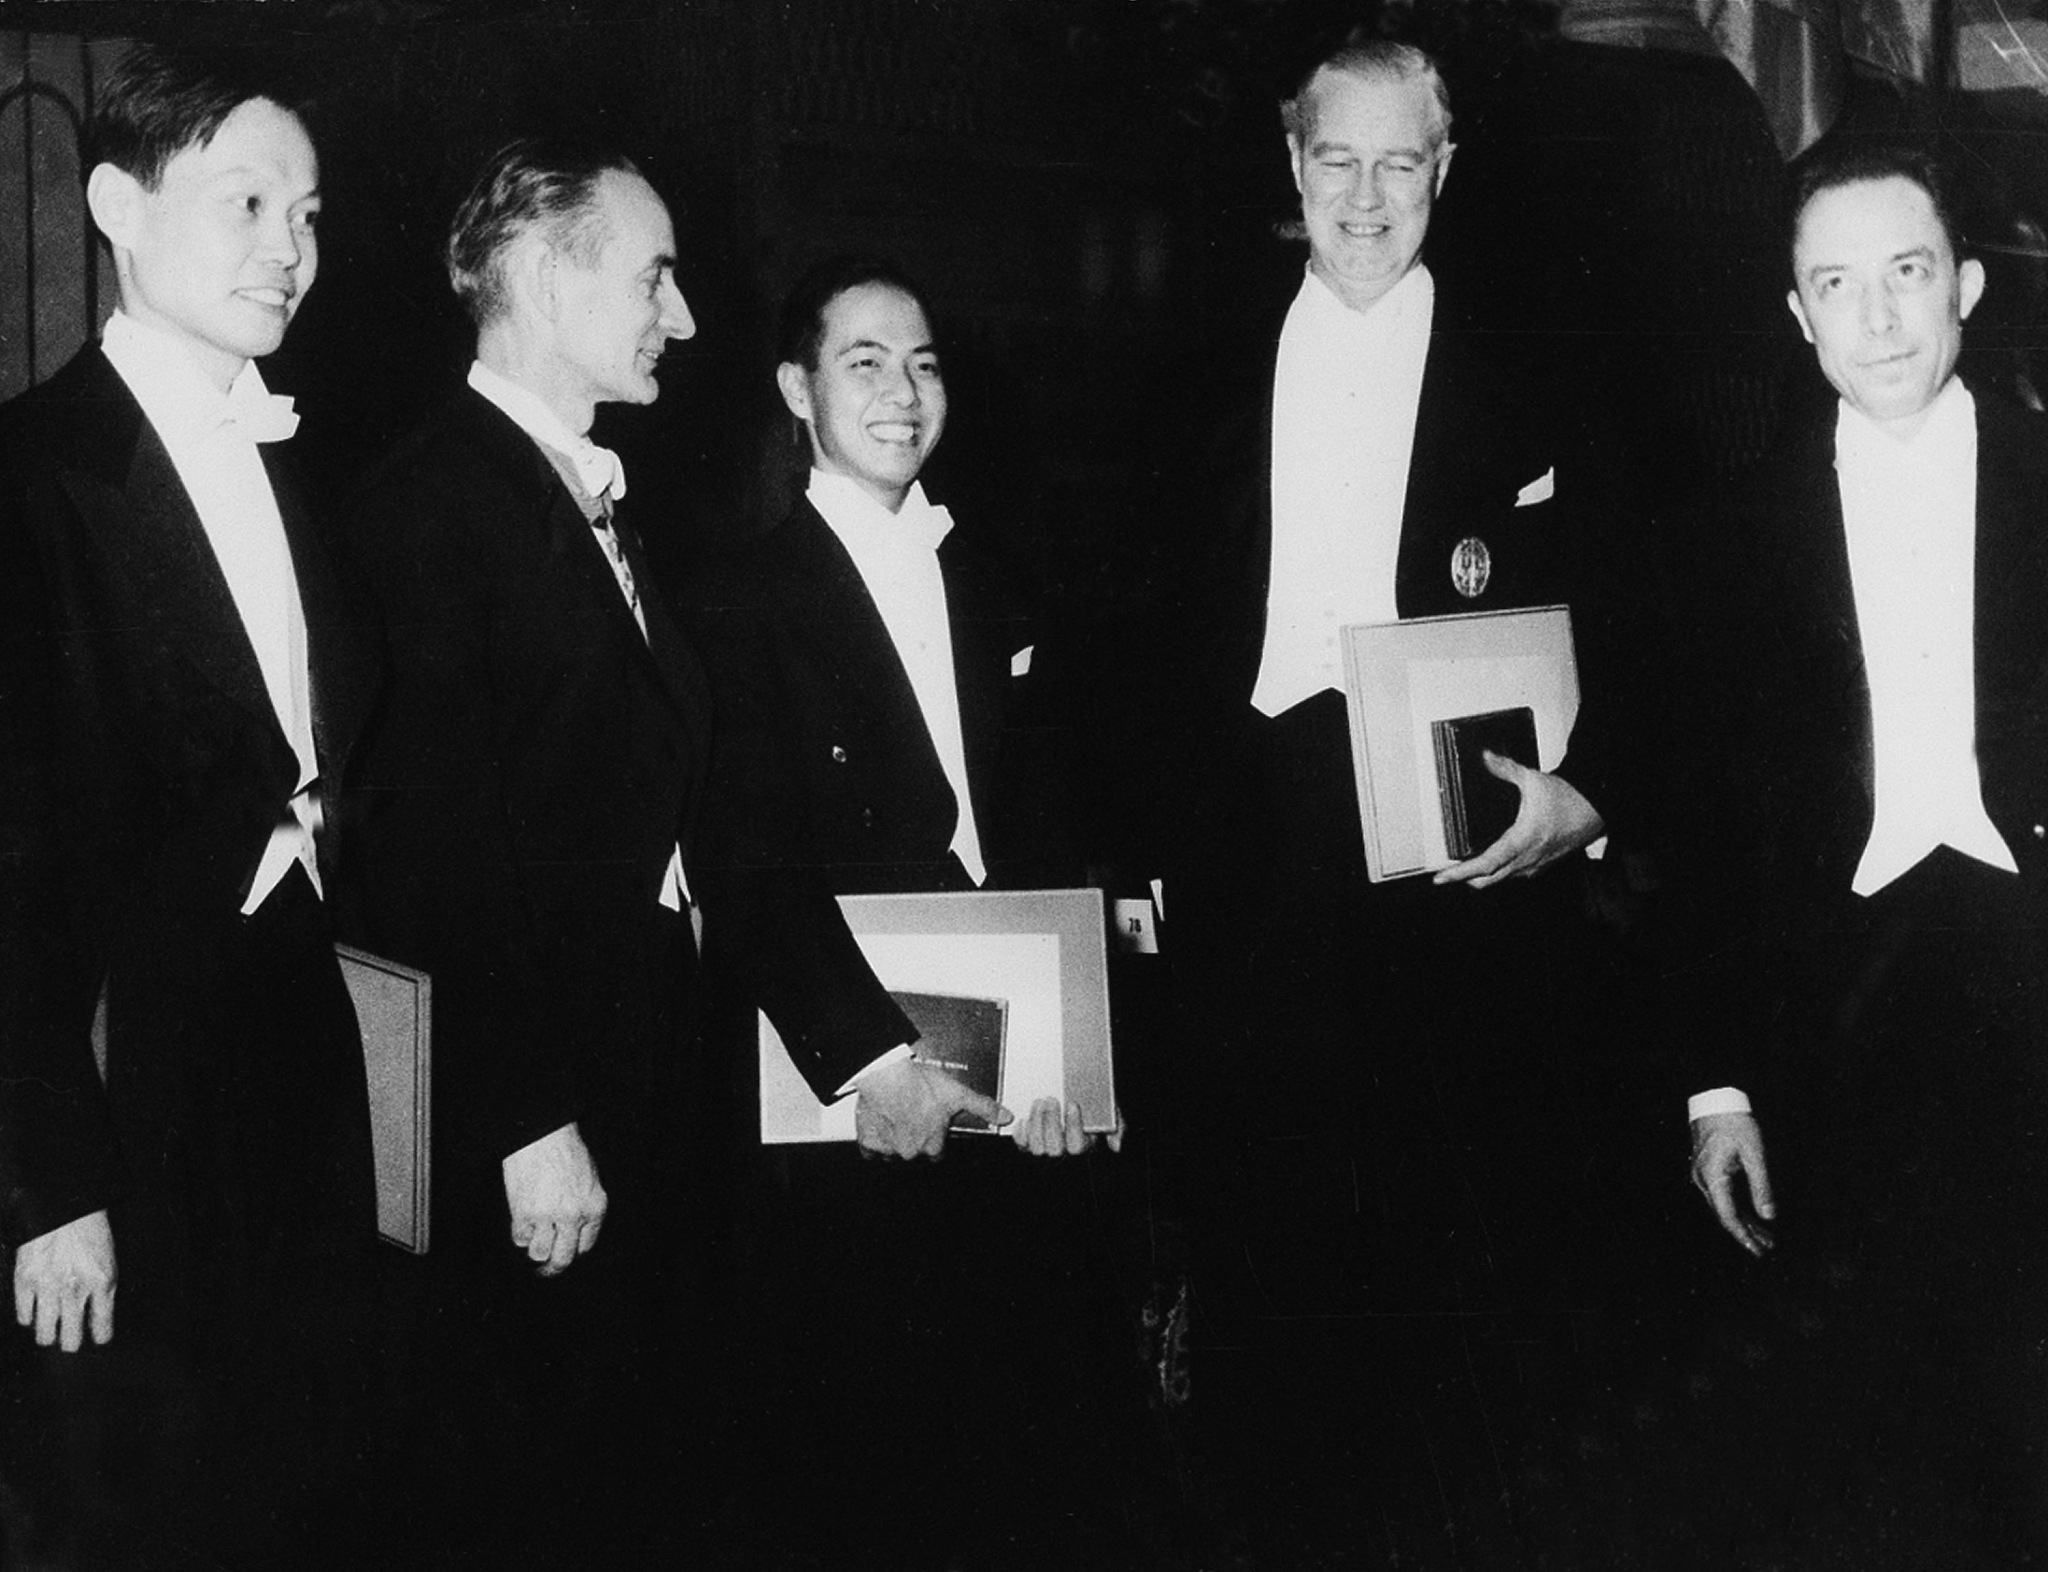 Nobel Prize winners in science and literature are pictured after receiving their awards in Stockholm, Sweden, December 10, 1957. From left to right: Dr. Chen-Ning Yang; Prof. Daniel Bovet, awarded in medicine for his work in pharmacology; Dr. Tsung Dao Lee, who shared the physics prize with Chen for disproving the law of parity; Sir Alexander Todd, recognized for his achievements in chemistry, and Albert Camus, who received the prize in literature. /CFP
